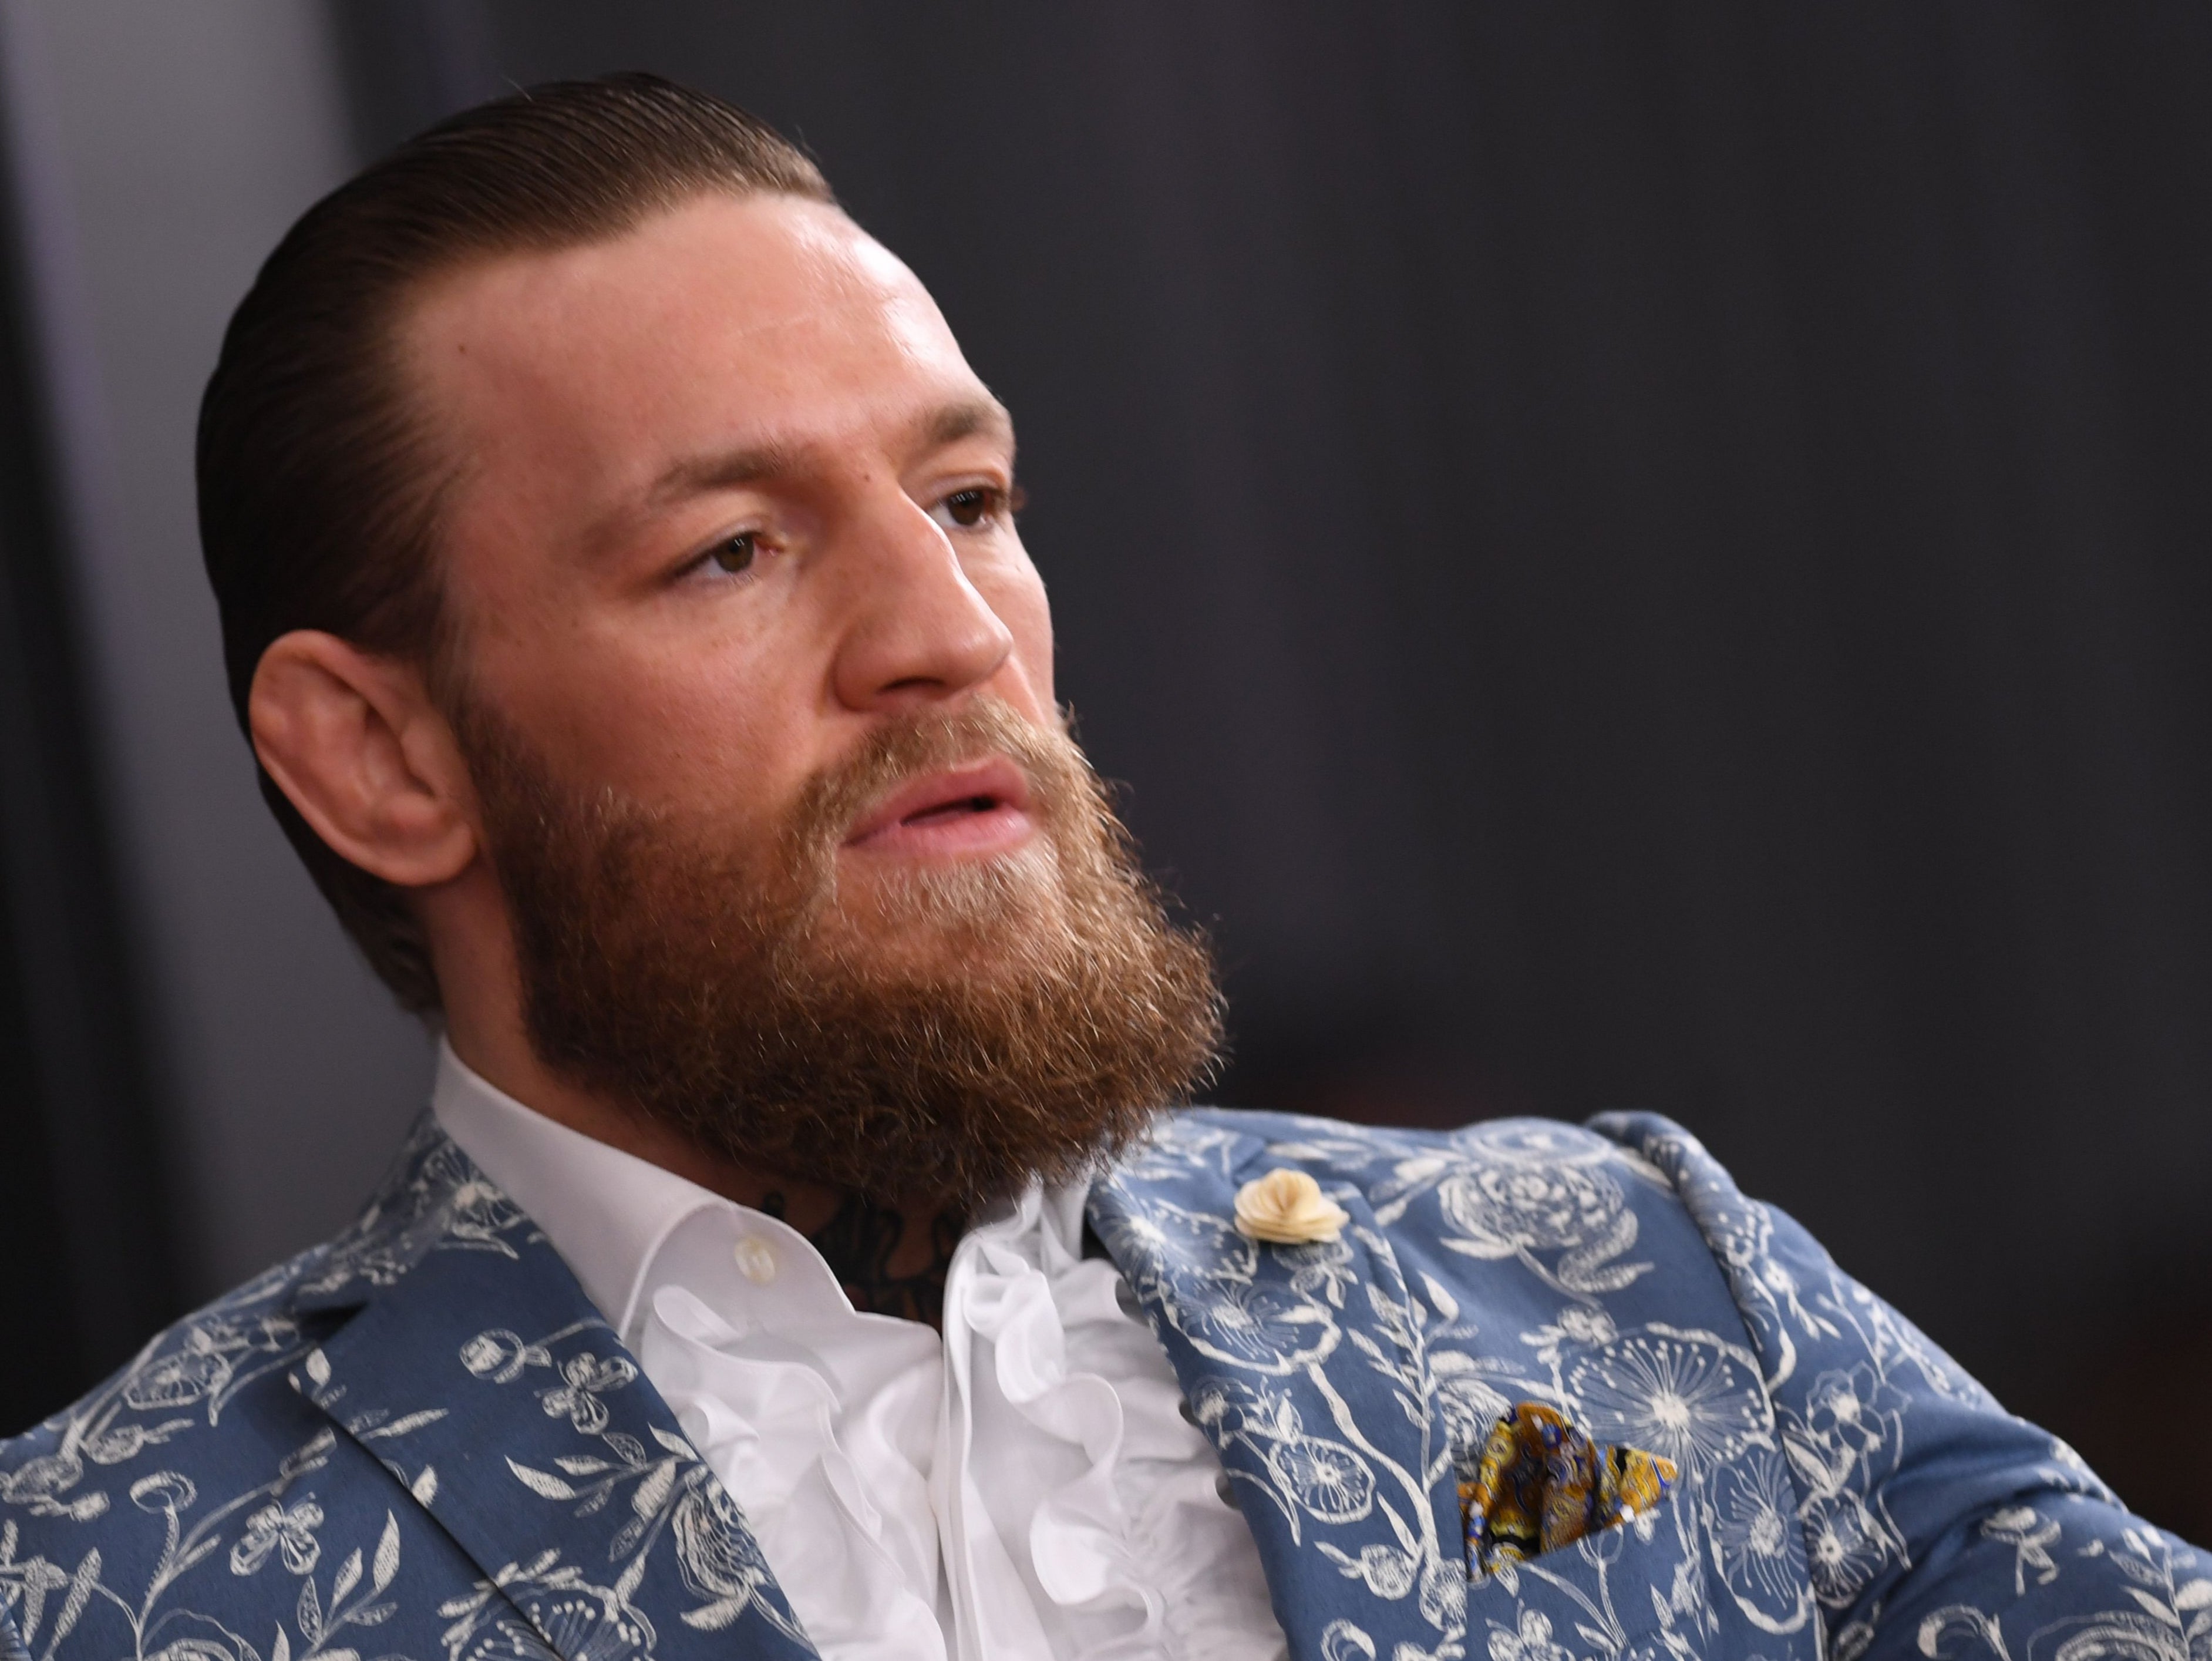 Former UFC lightweight and featherweight champion Conor McGregor